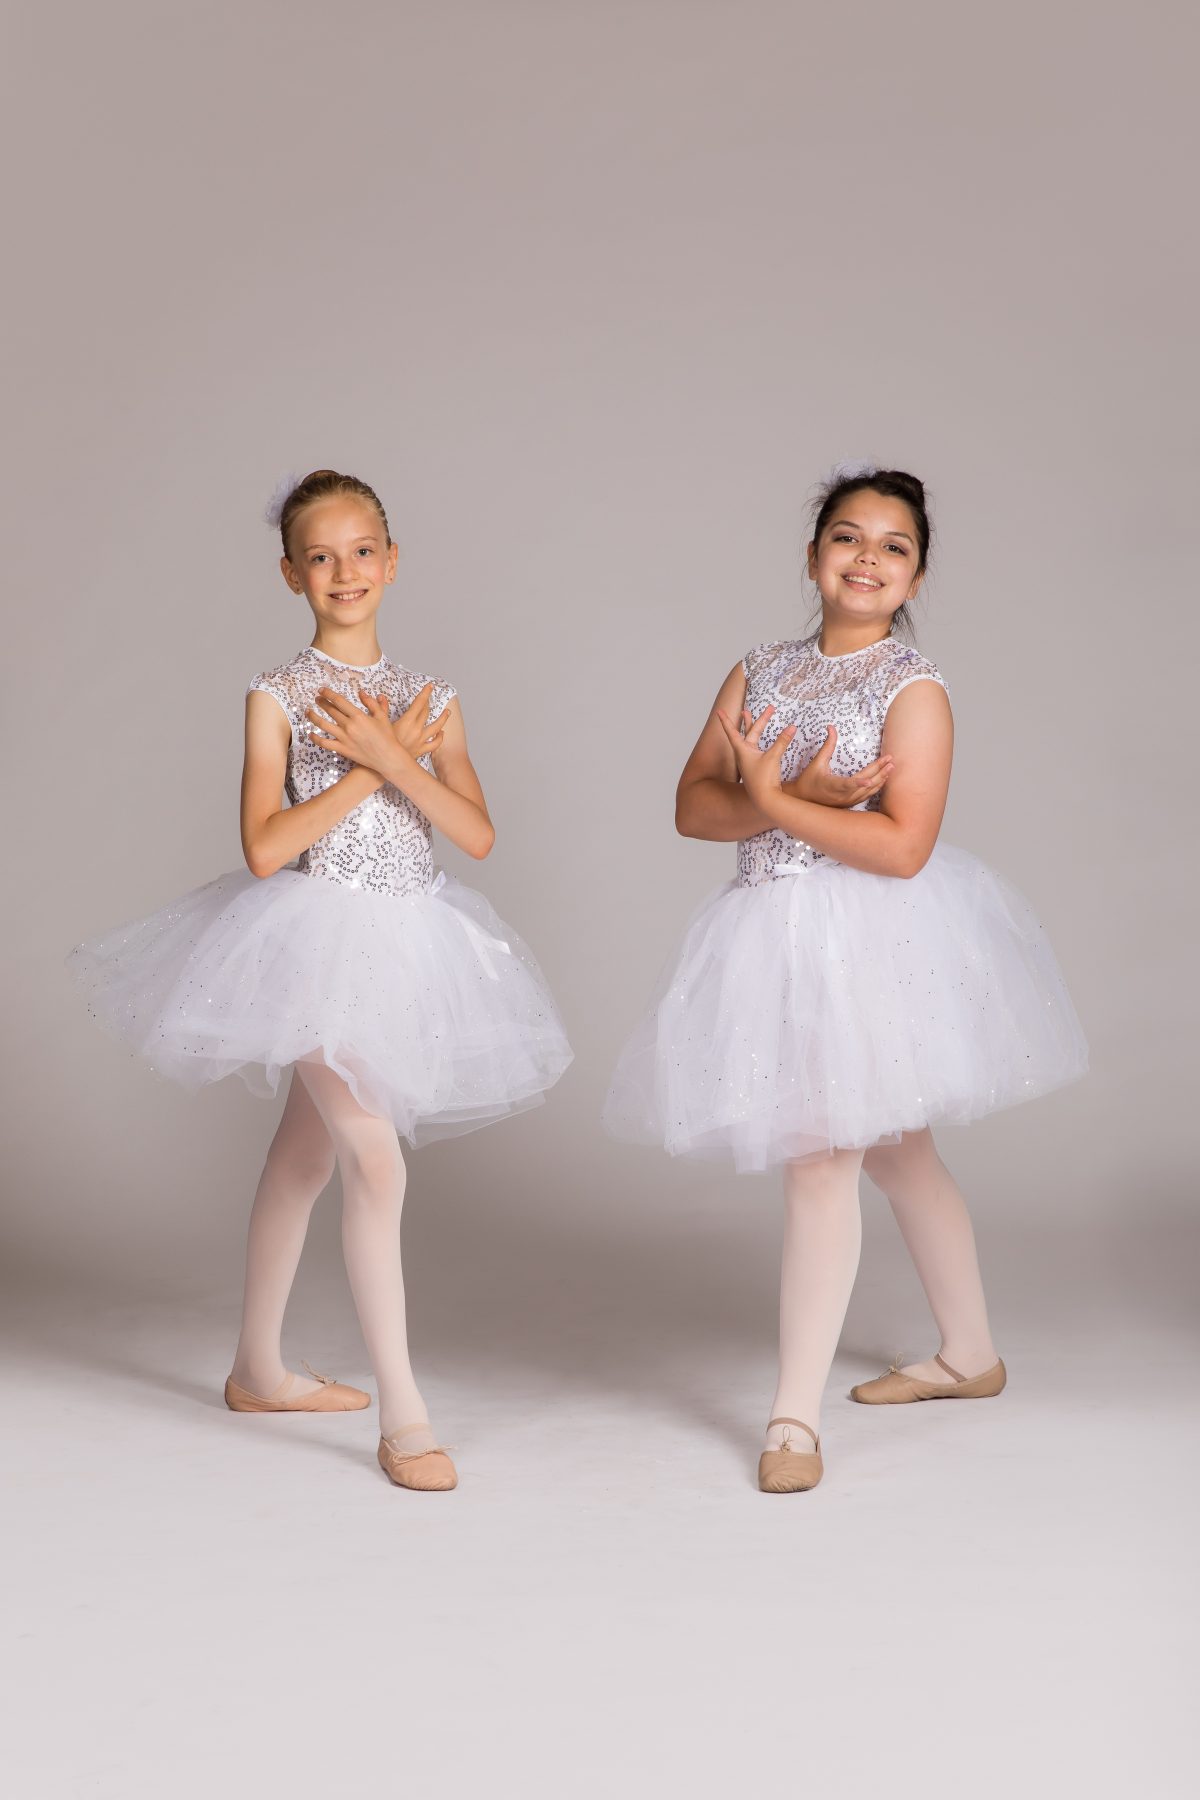 Equilibrium Dance Academy – Ballet Level 1-2 for ages 8-12